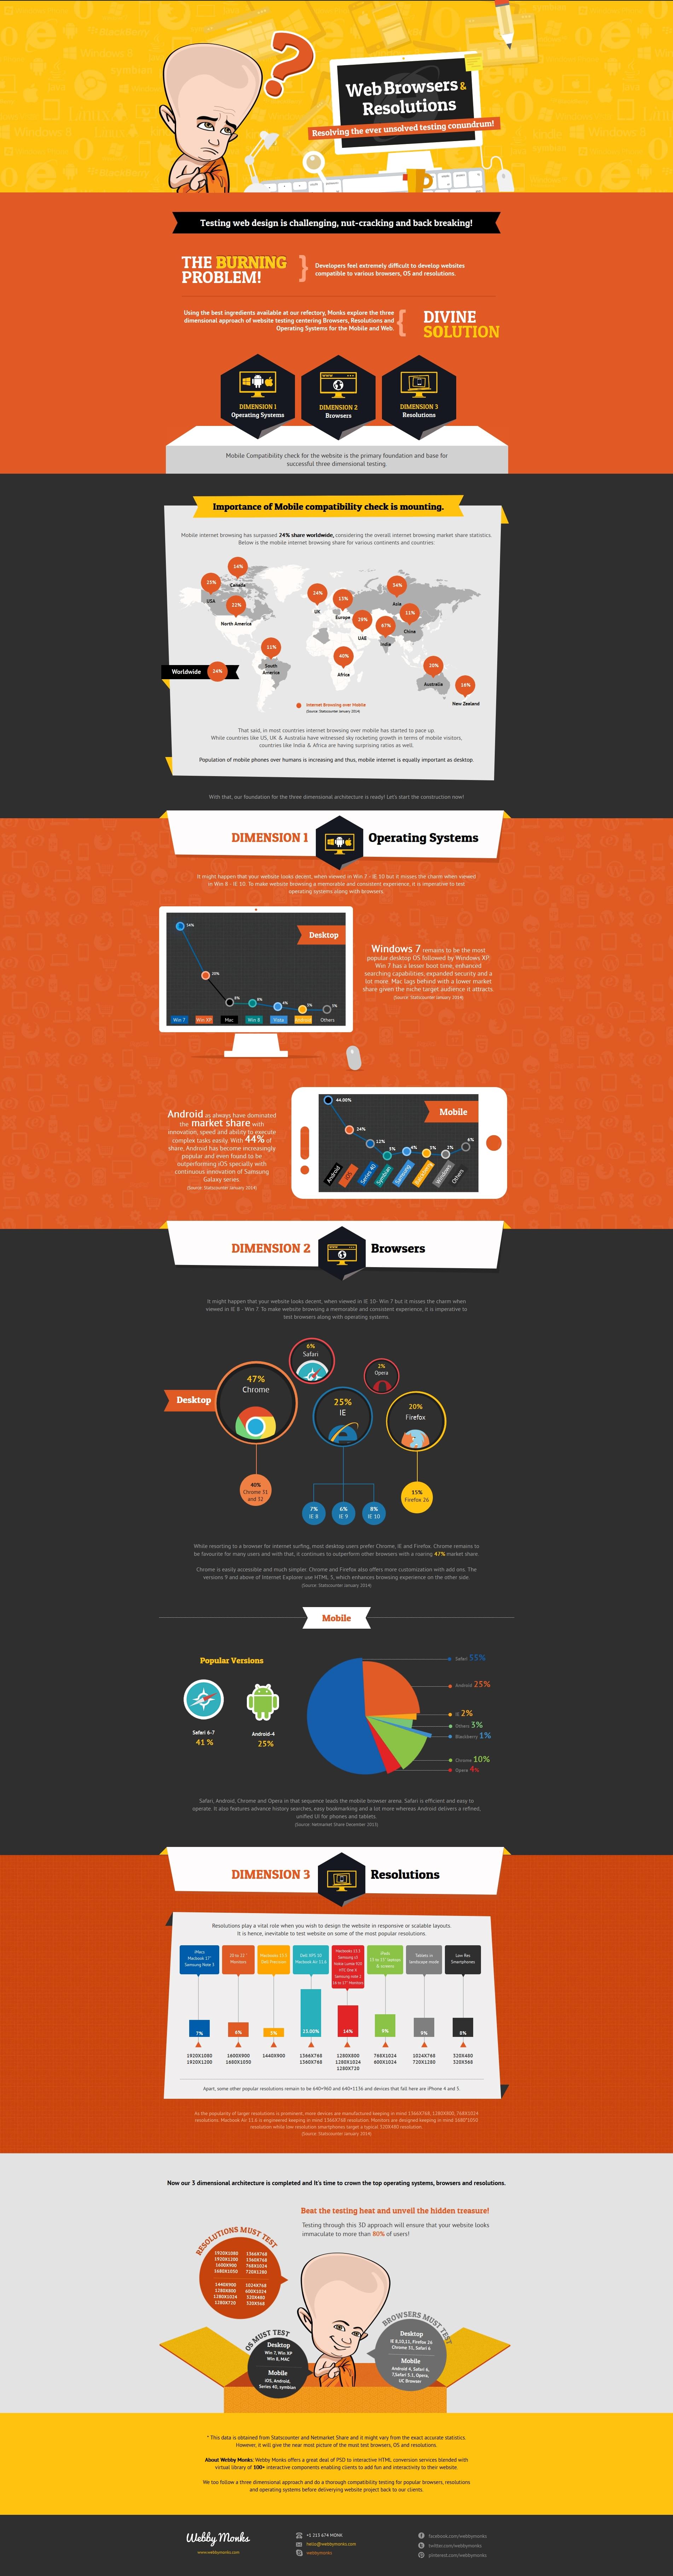 Website Testing Infographic